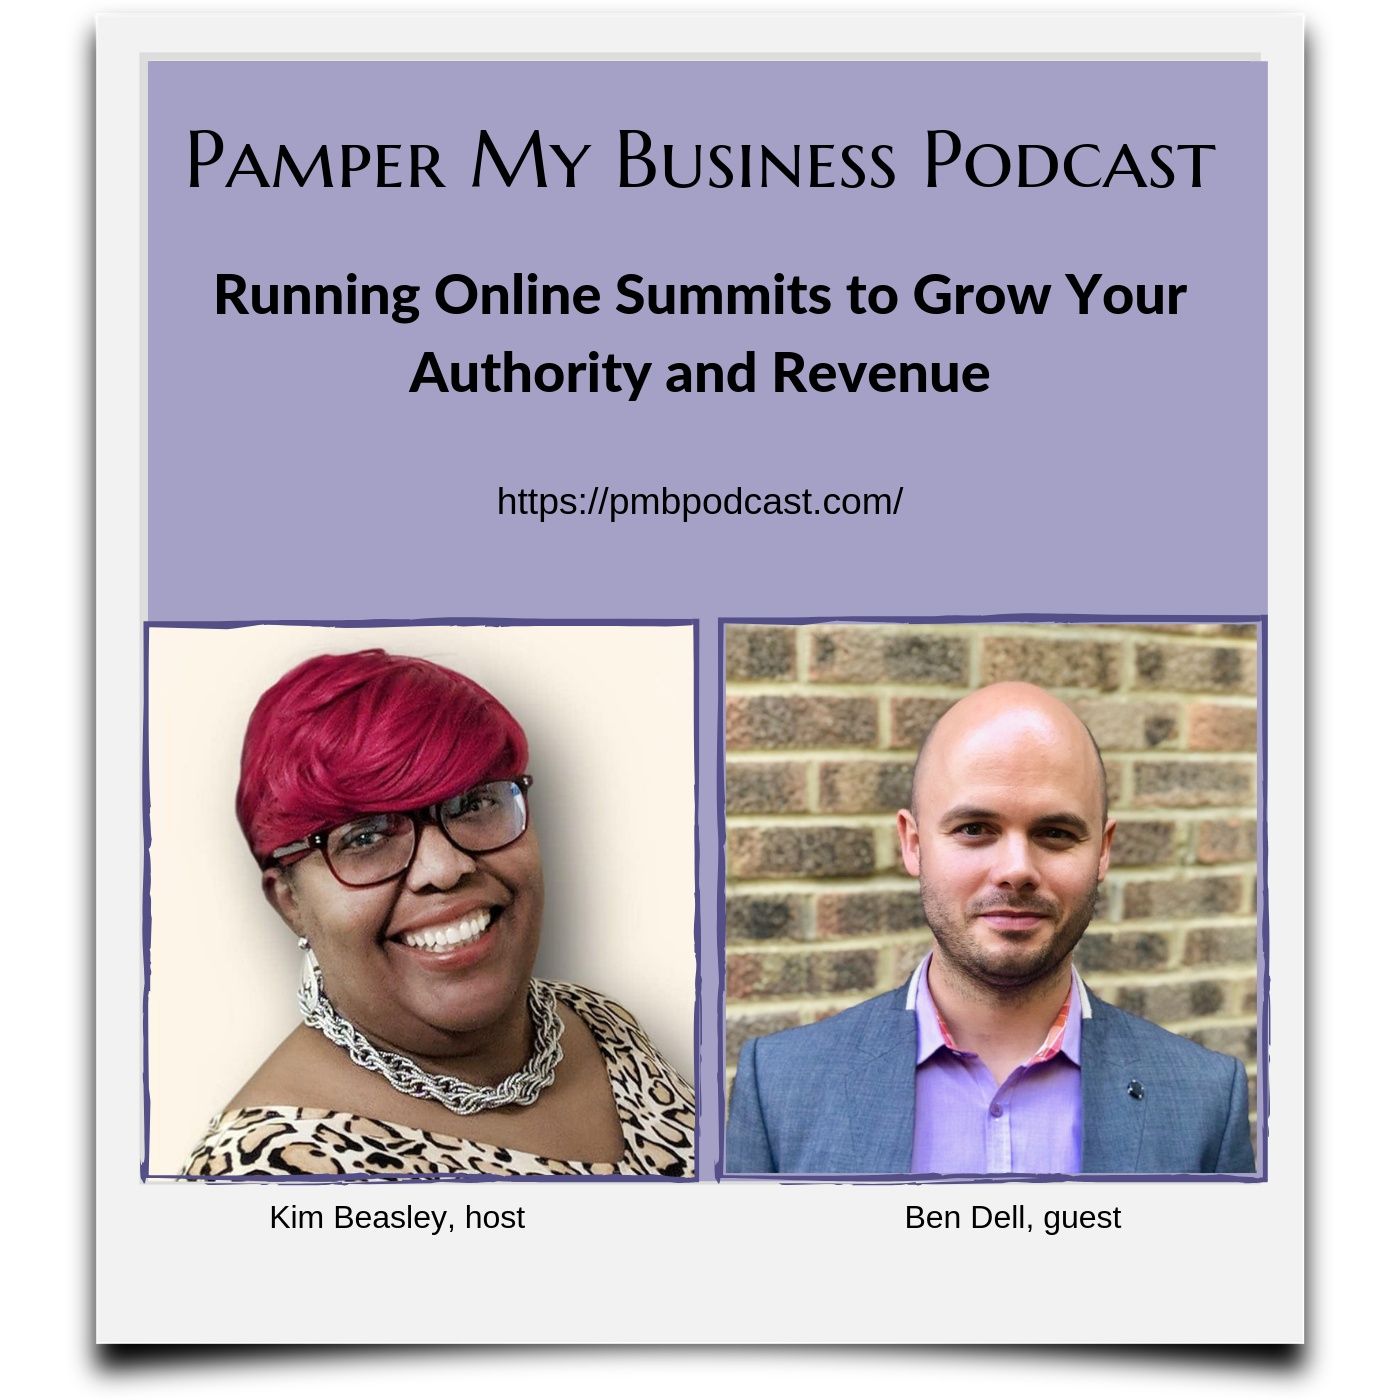 Running Online Summits to Grow Your Authority and Revenue